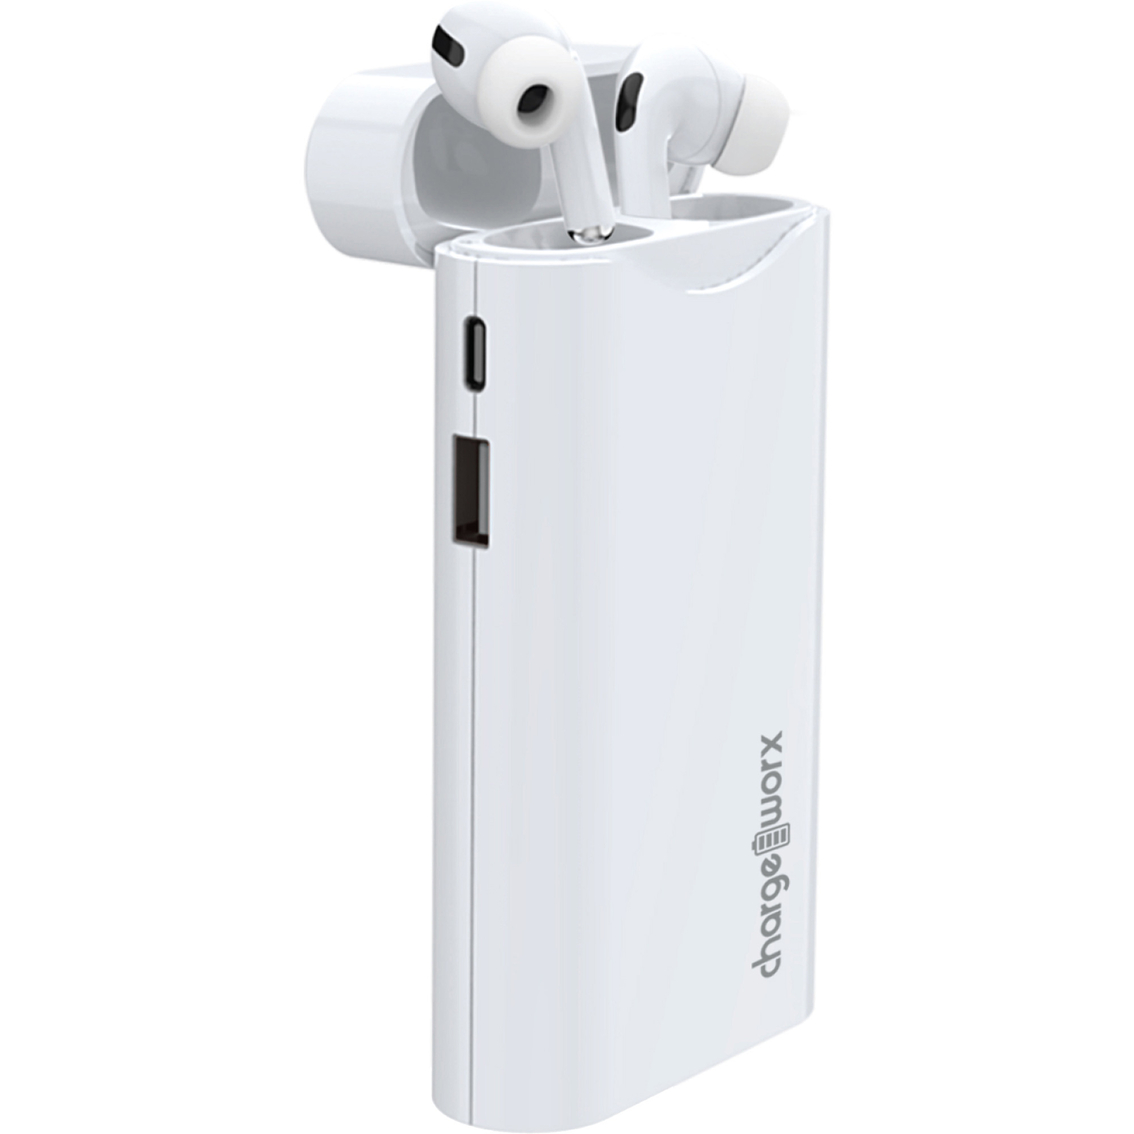 Chargeworx Airpods Pro Charging Power Bank Cell Phone | Electronics | Shop The Exchange